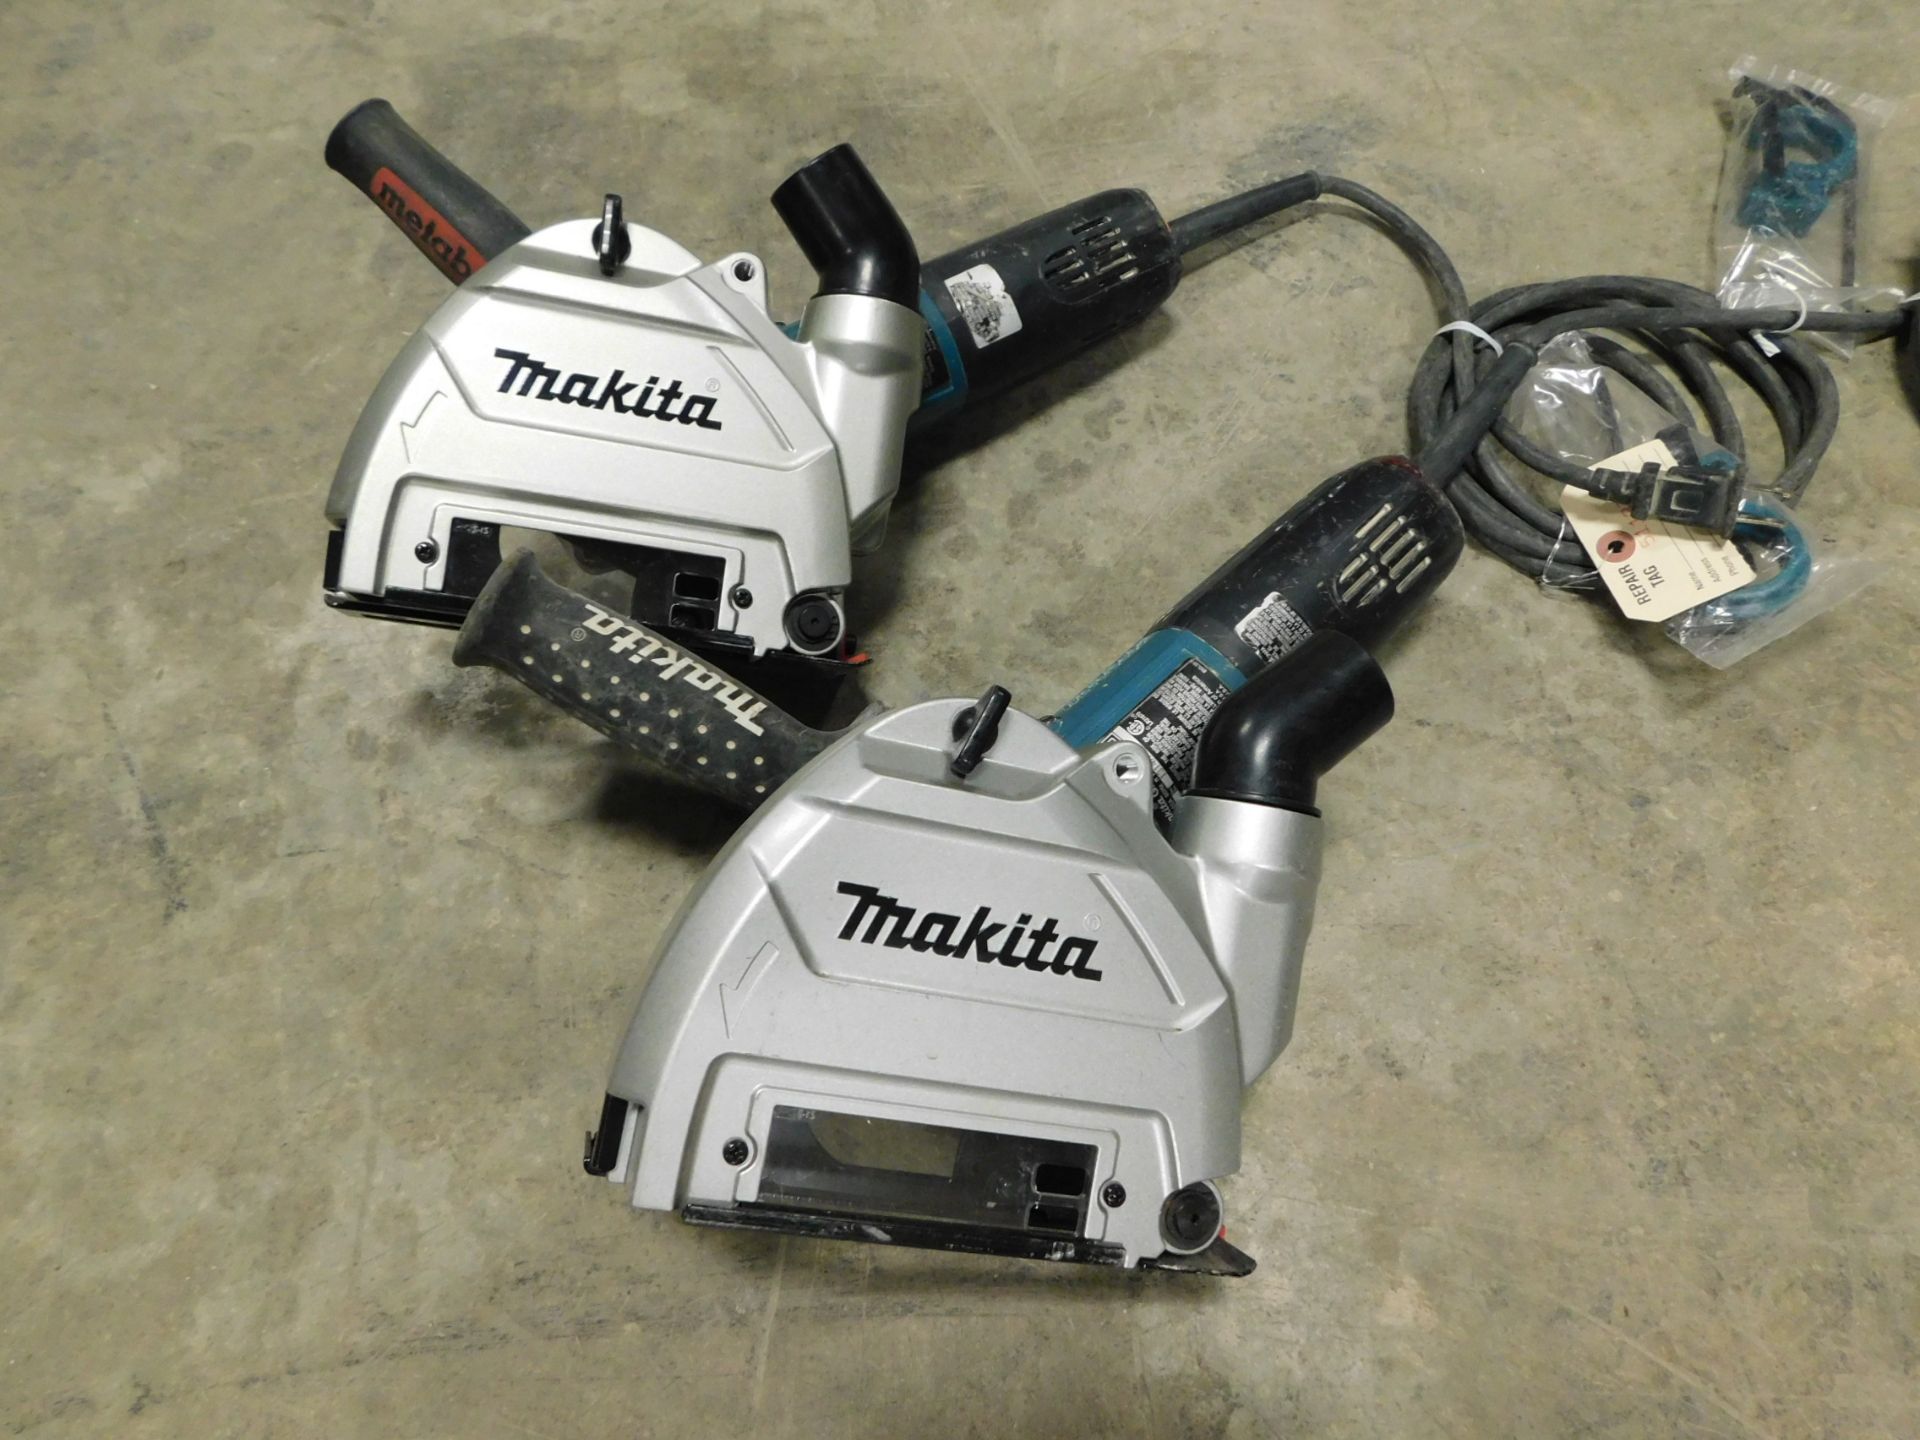 (2) Makita 5" Angle Grinders with Dust Collecting Wheel Guards, Need Repaired